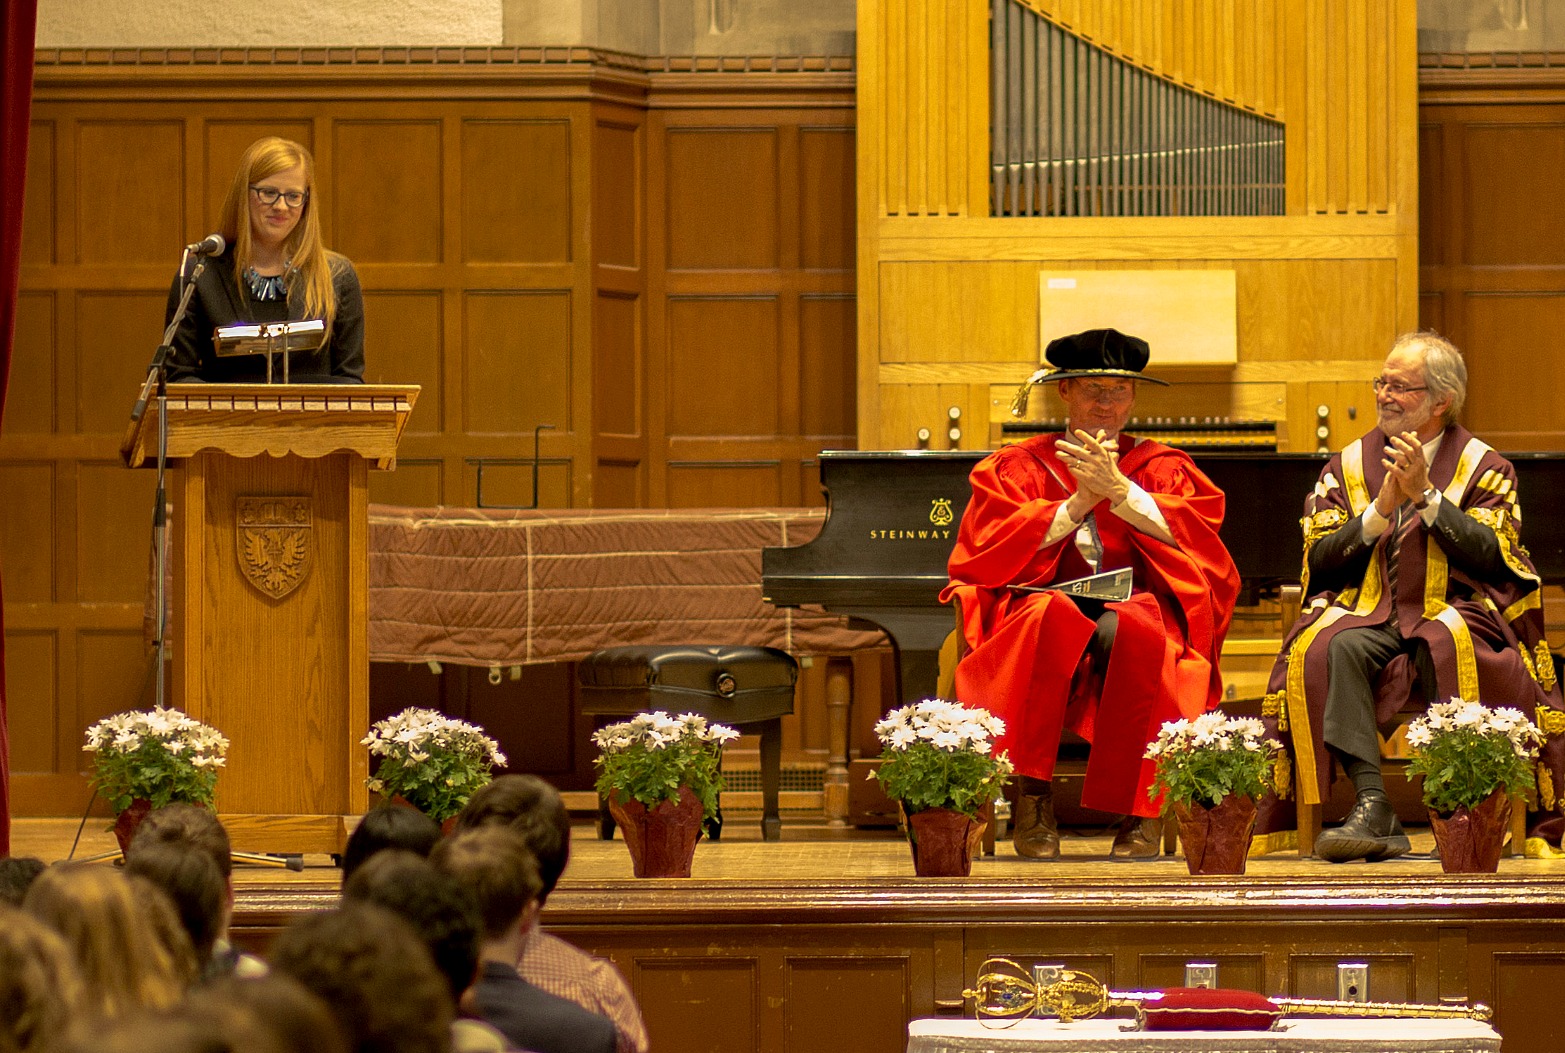 Diana Weir recently spoke to students at the Faculty of Humanities 36th Annual Award Assembly, held in Convocation Hall.